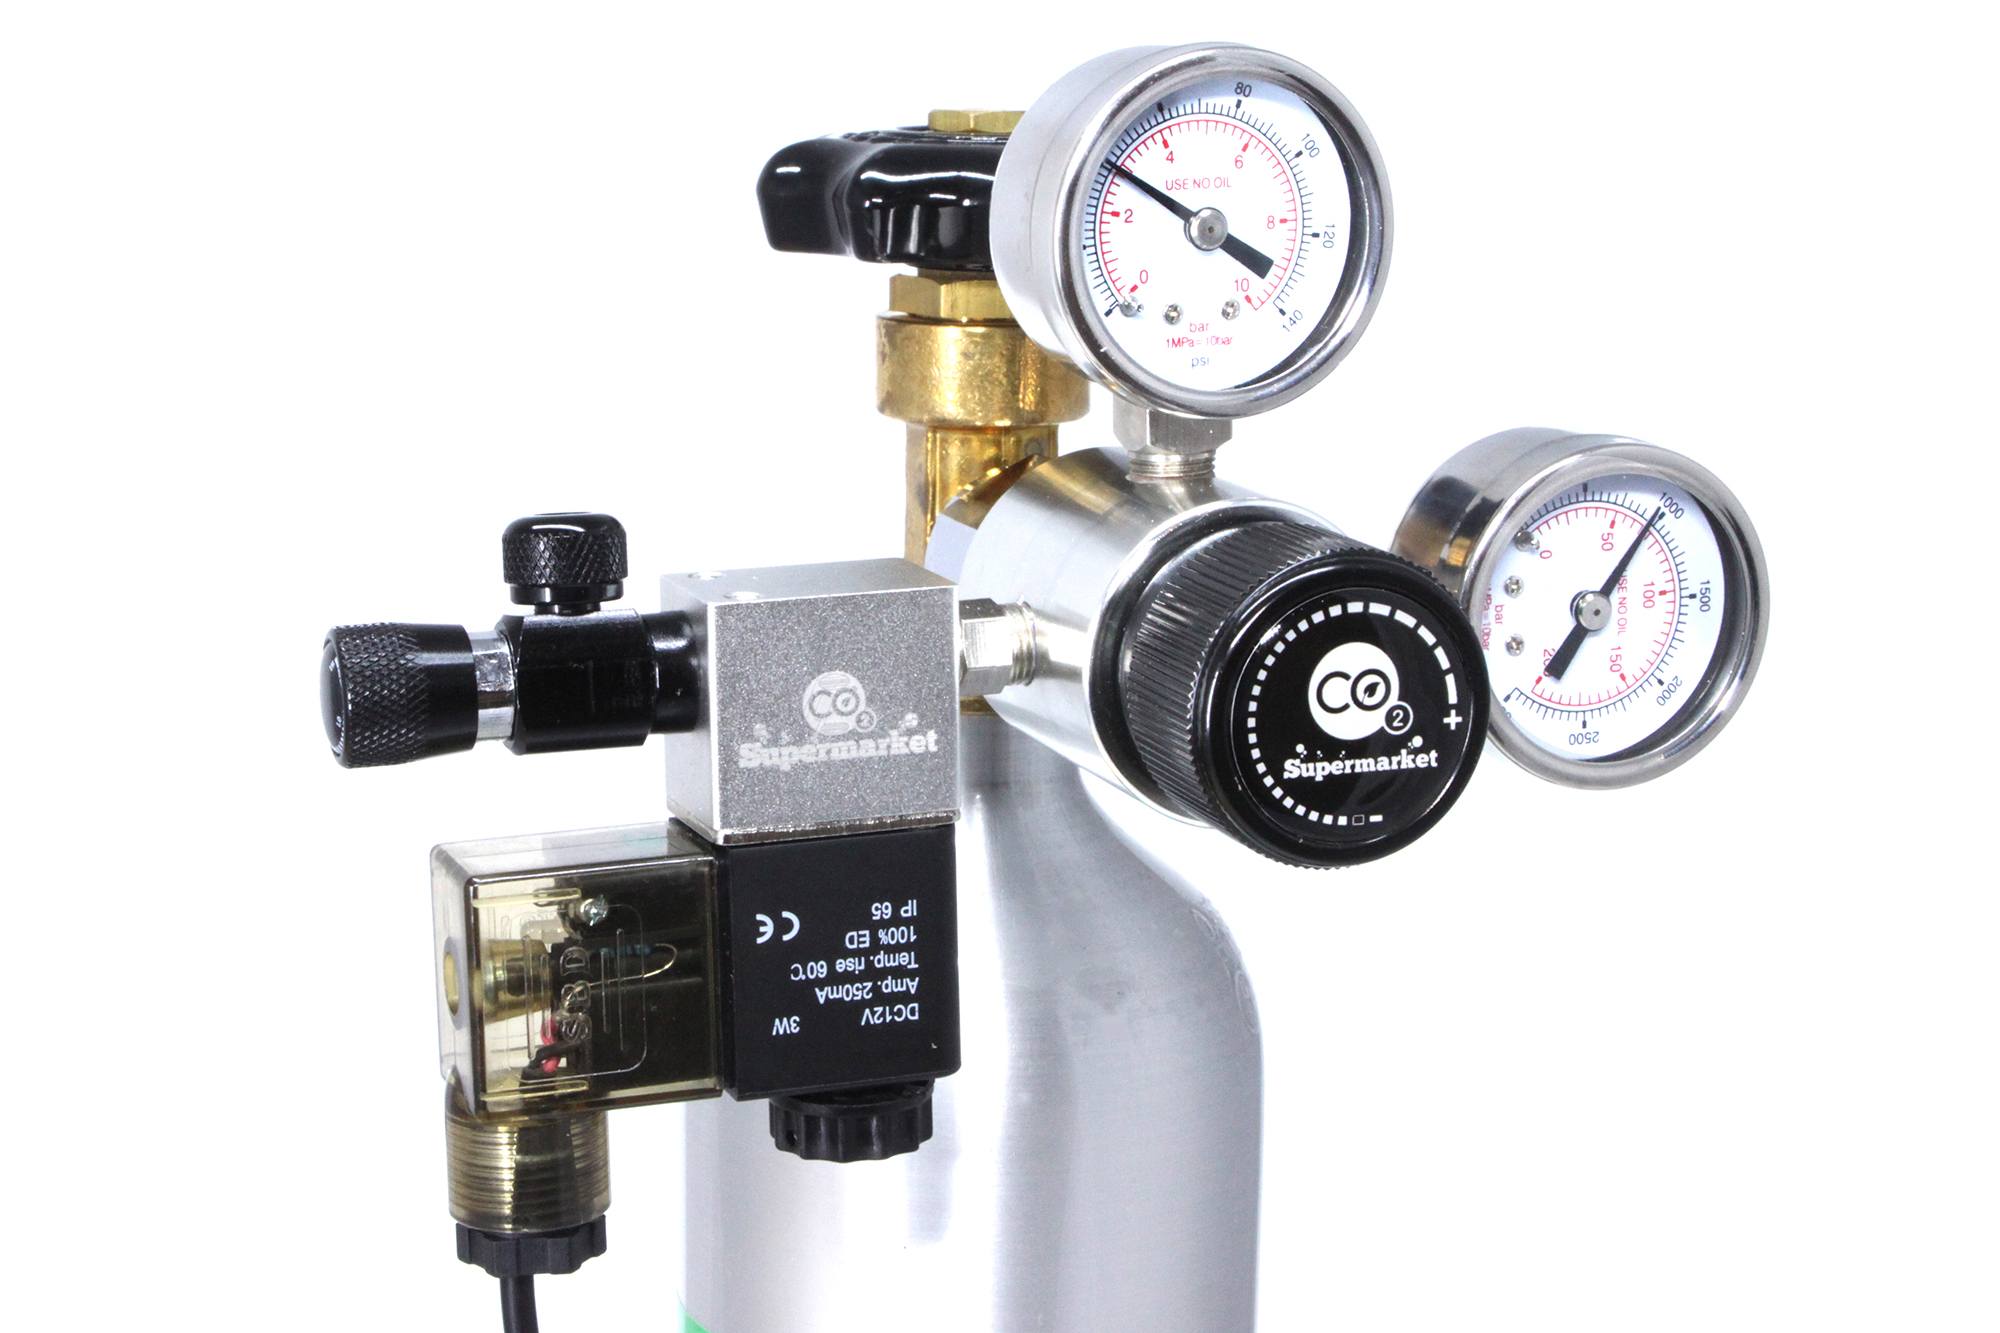 Single stage CO2 regulator attached to Horizontal Cylinder